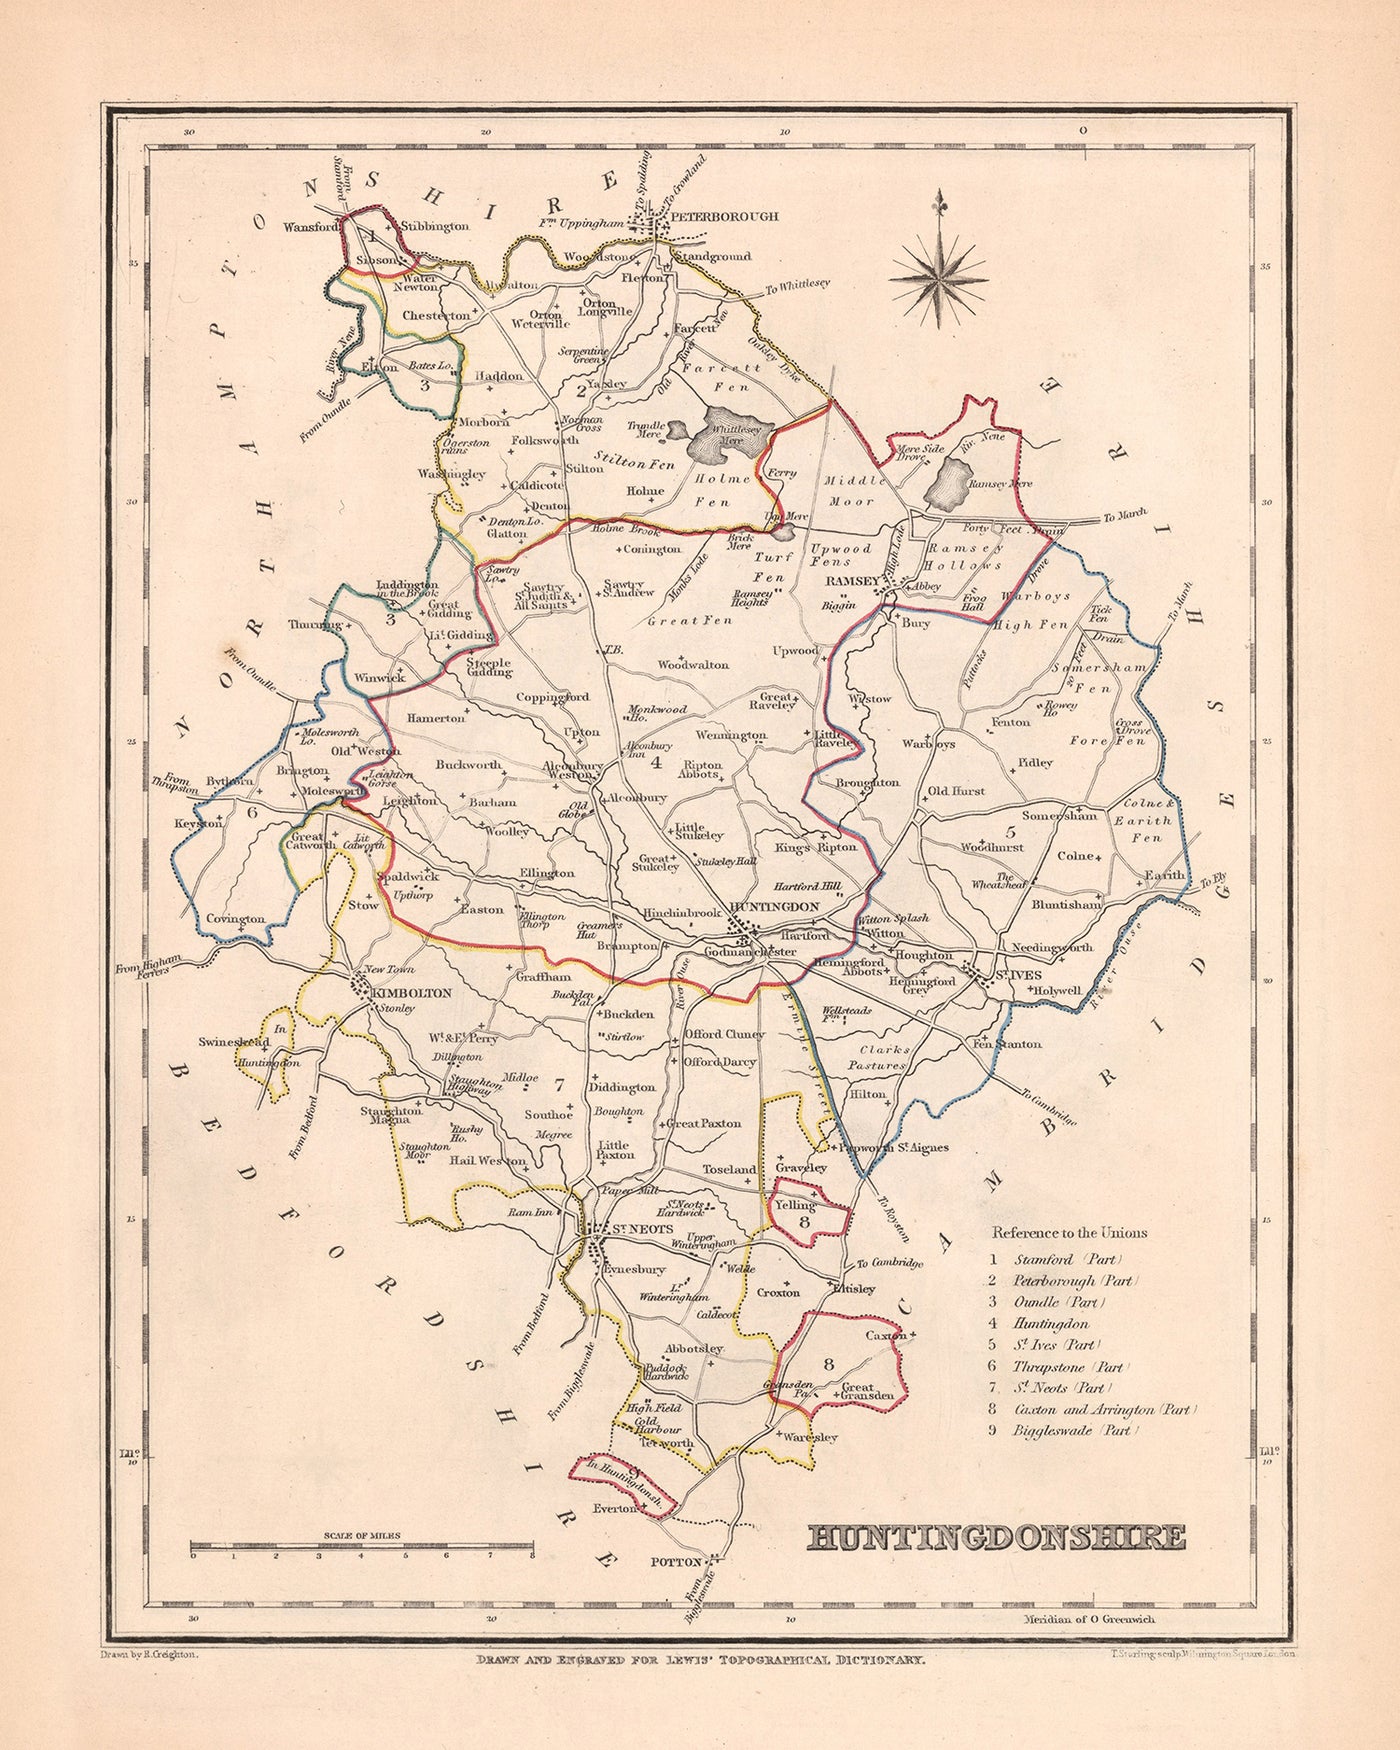 Old Map of Huntingdonshire by Samuel Lewis, 1844: St. Ives, St. Neots, Ramsey, Godmanchester, and Kimbolton